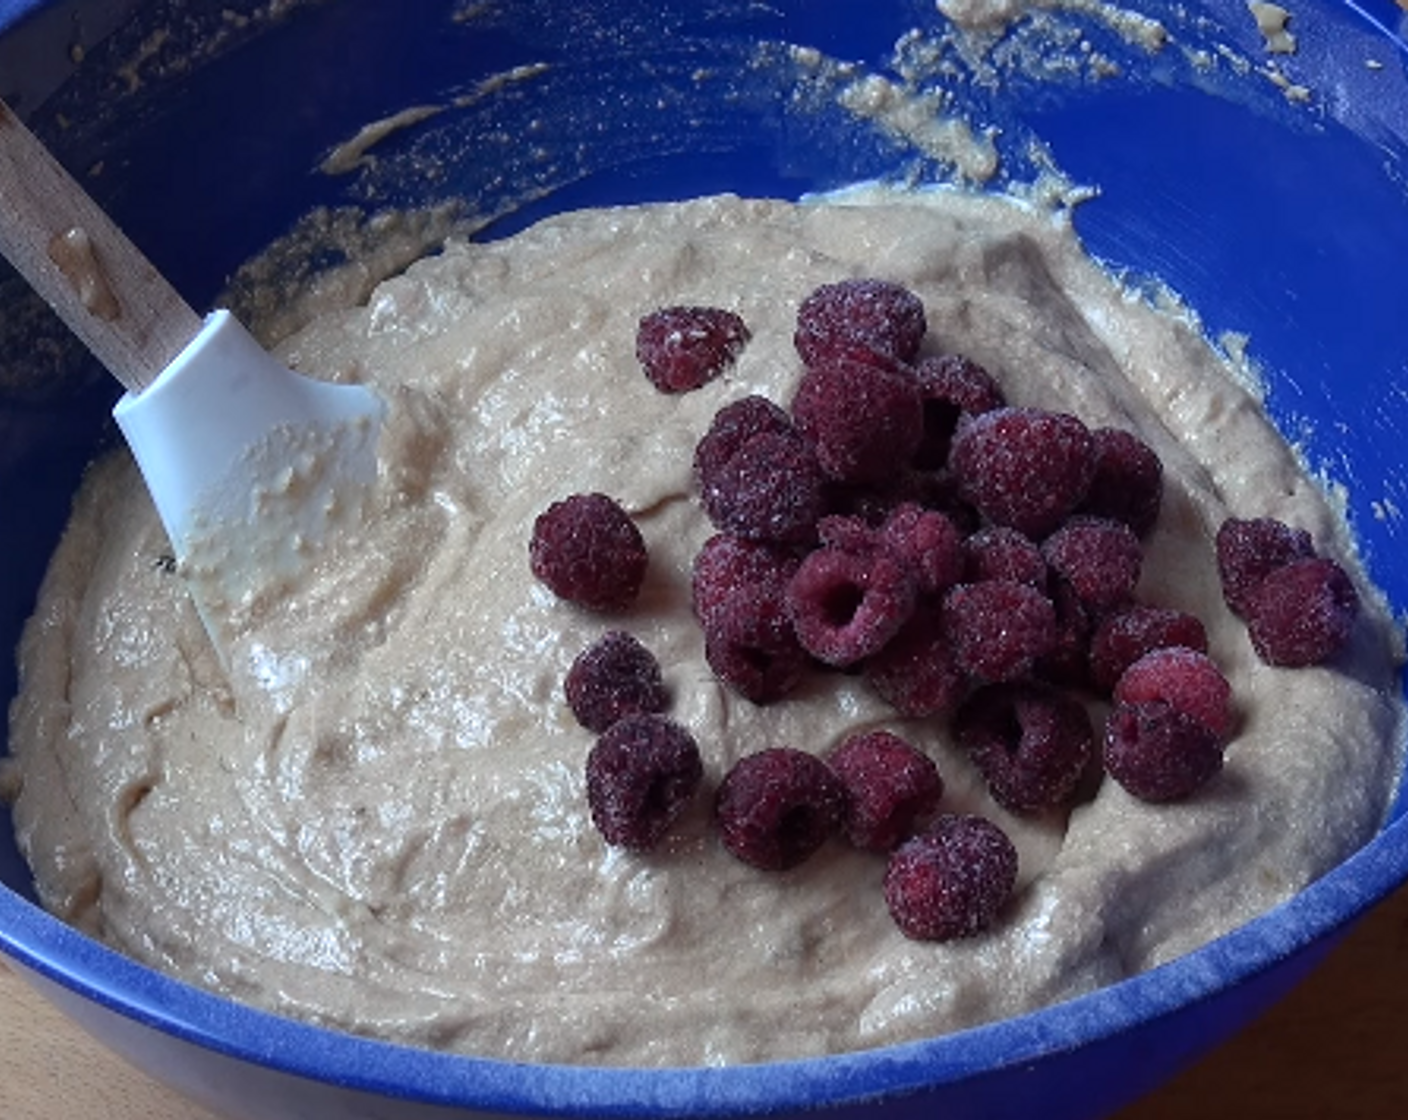 step 2 Add Self-Rising Flour (2 cups), Baking Powder (1 tsp), and Ground Cinnamon (1 tsp). Beat together. Stir in Milk (1/2 cup), fold in frozen Fresh Raspberry (1/2 cup).